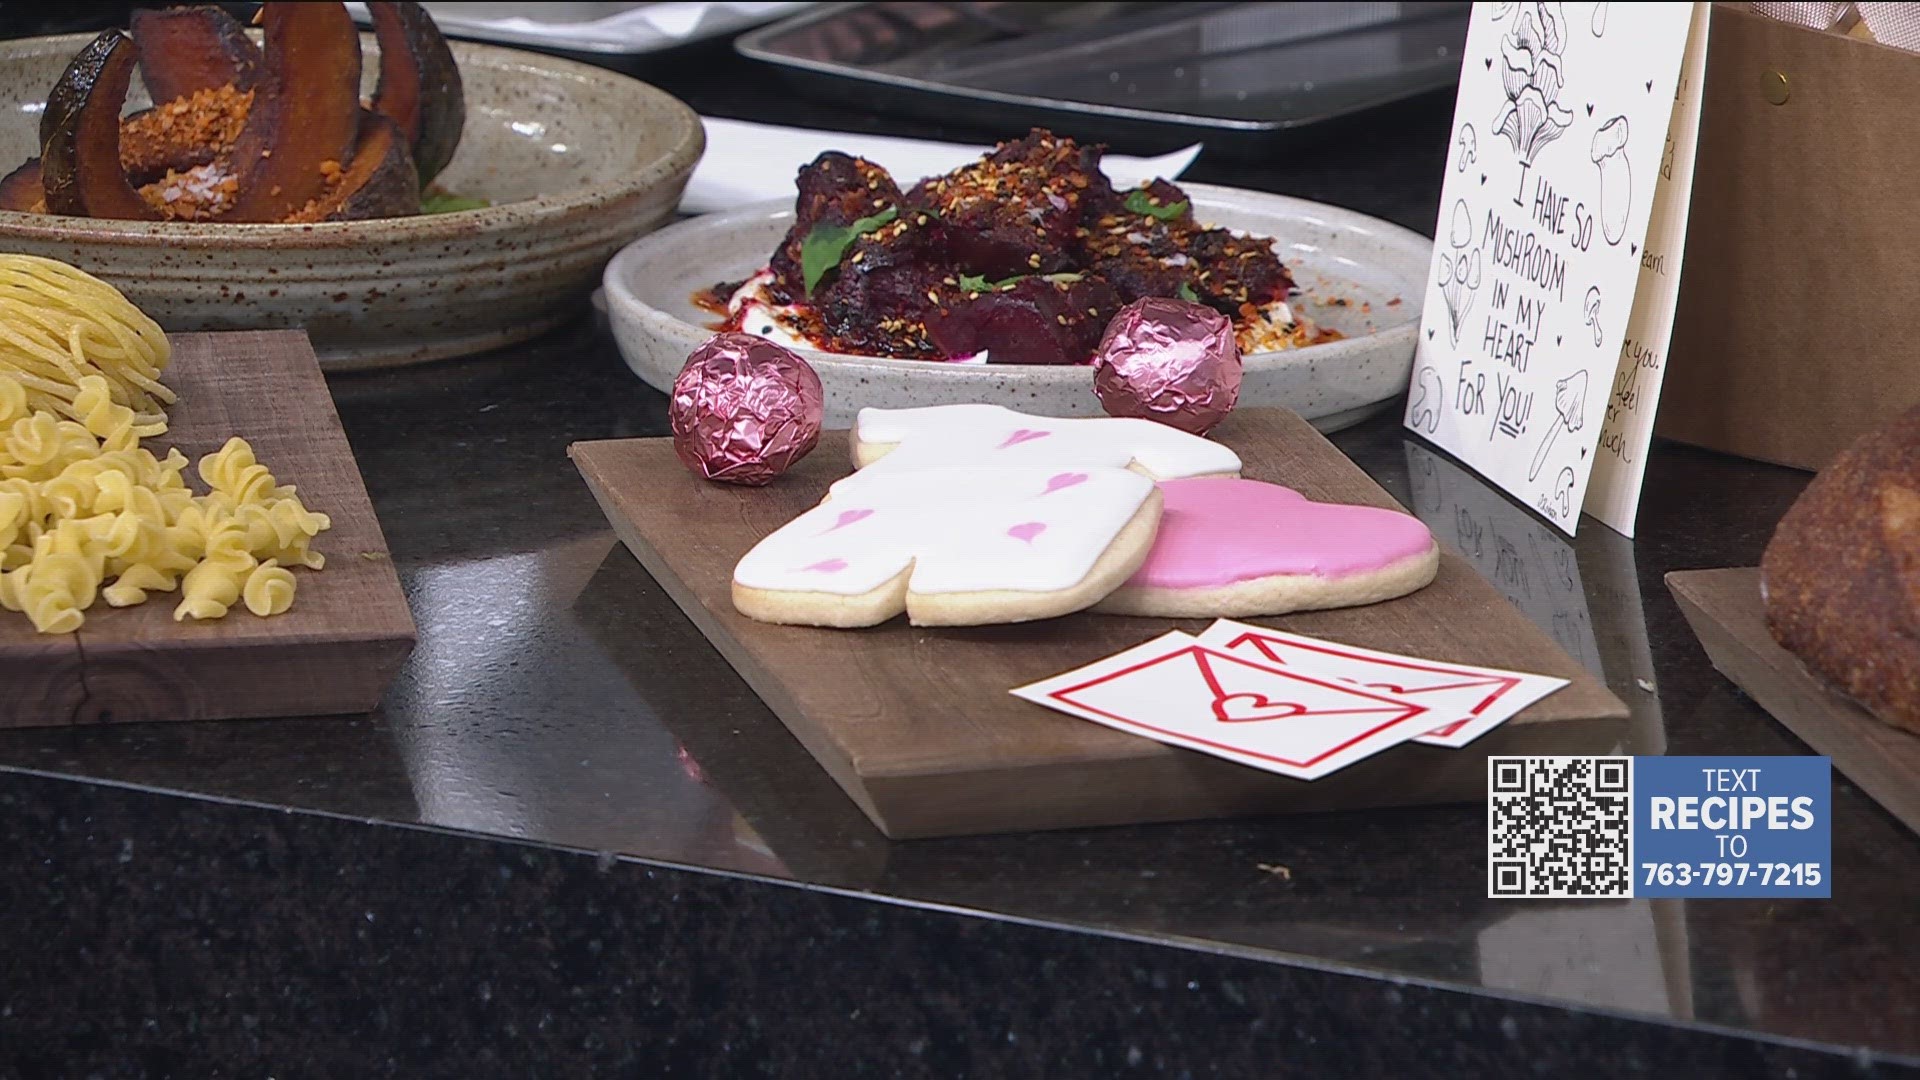 Executive Chef Ingrid Norgaard and Pastry Chef Maria Beck joined KARE 11 Saturday to share a recipe and discuss Saturday's Valentine Pop-Up event.